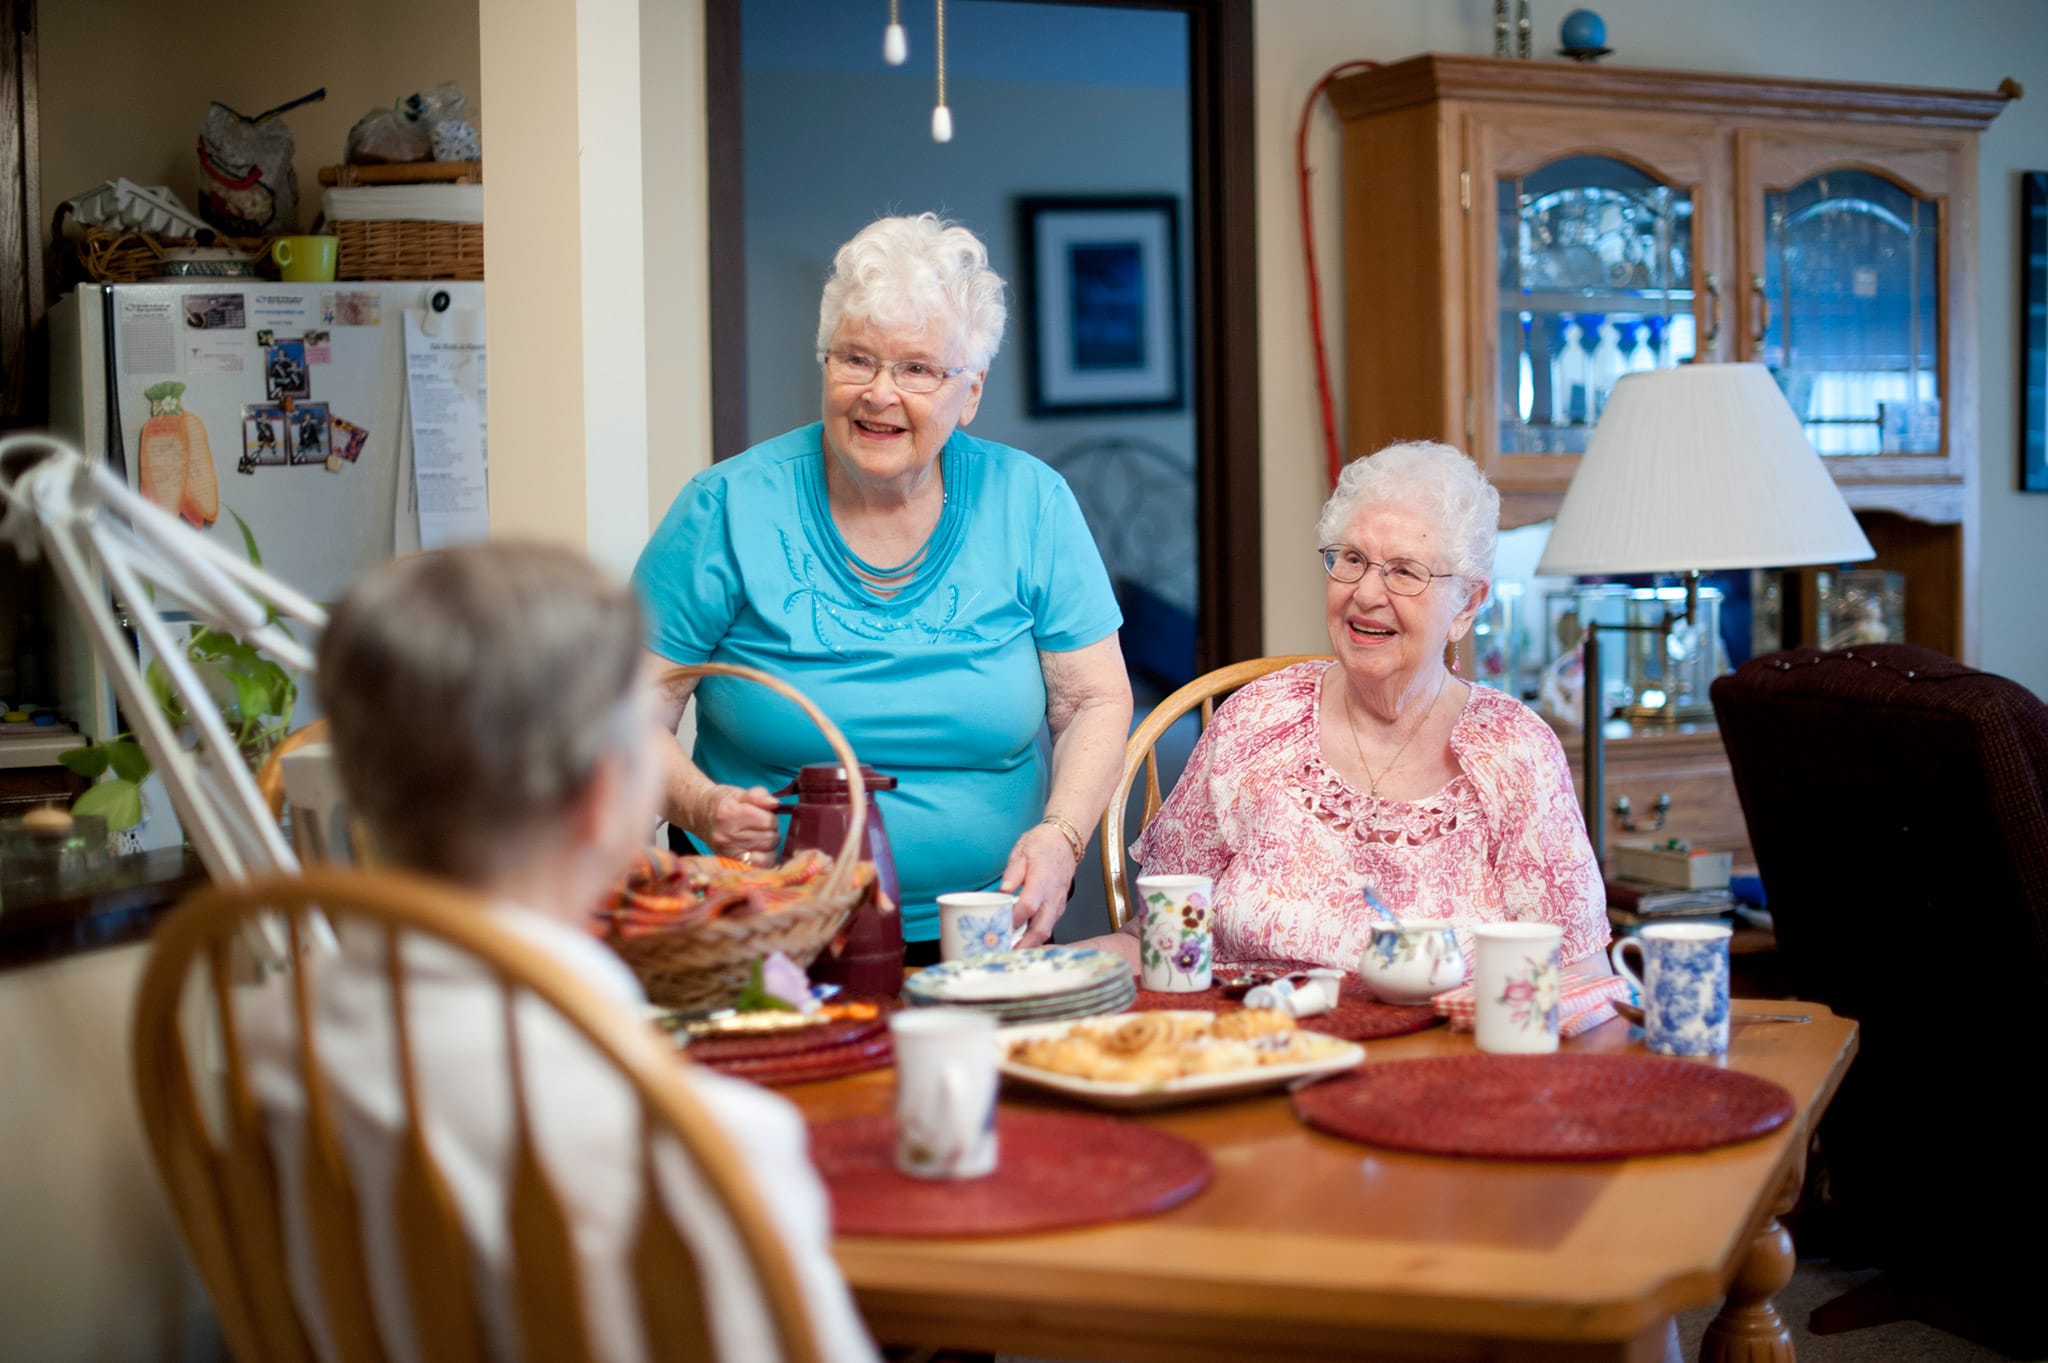 Food for the soul: Special dietary needs of seniors